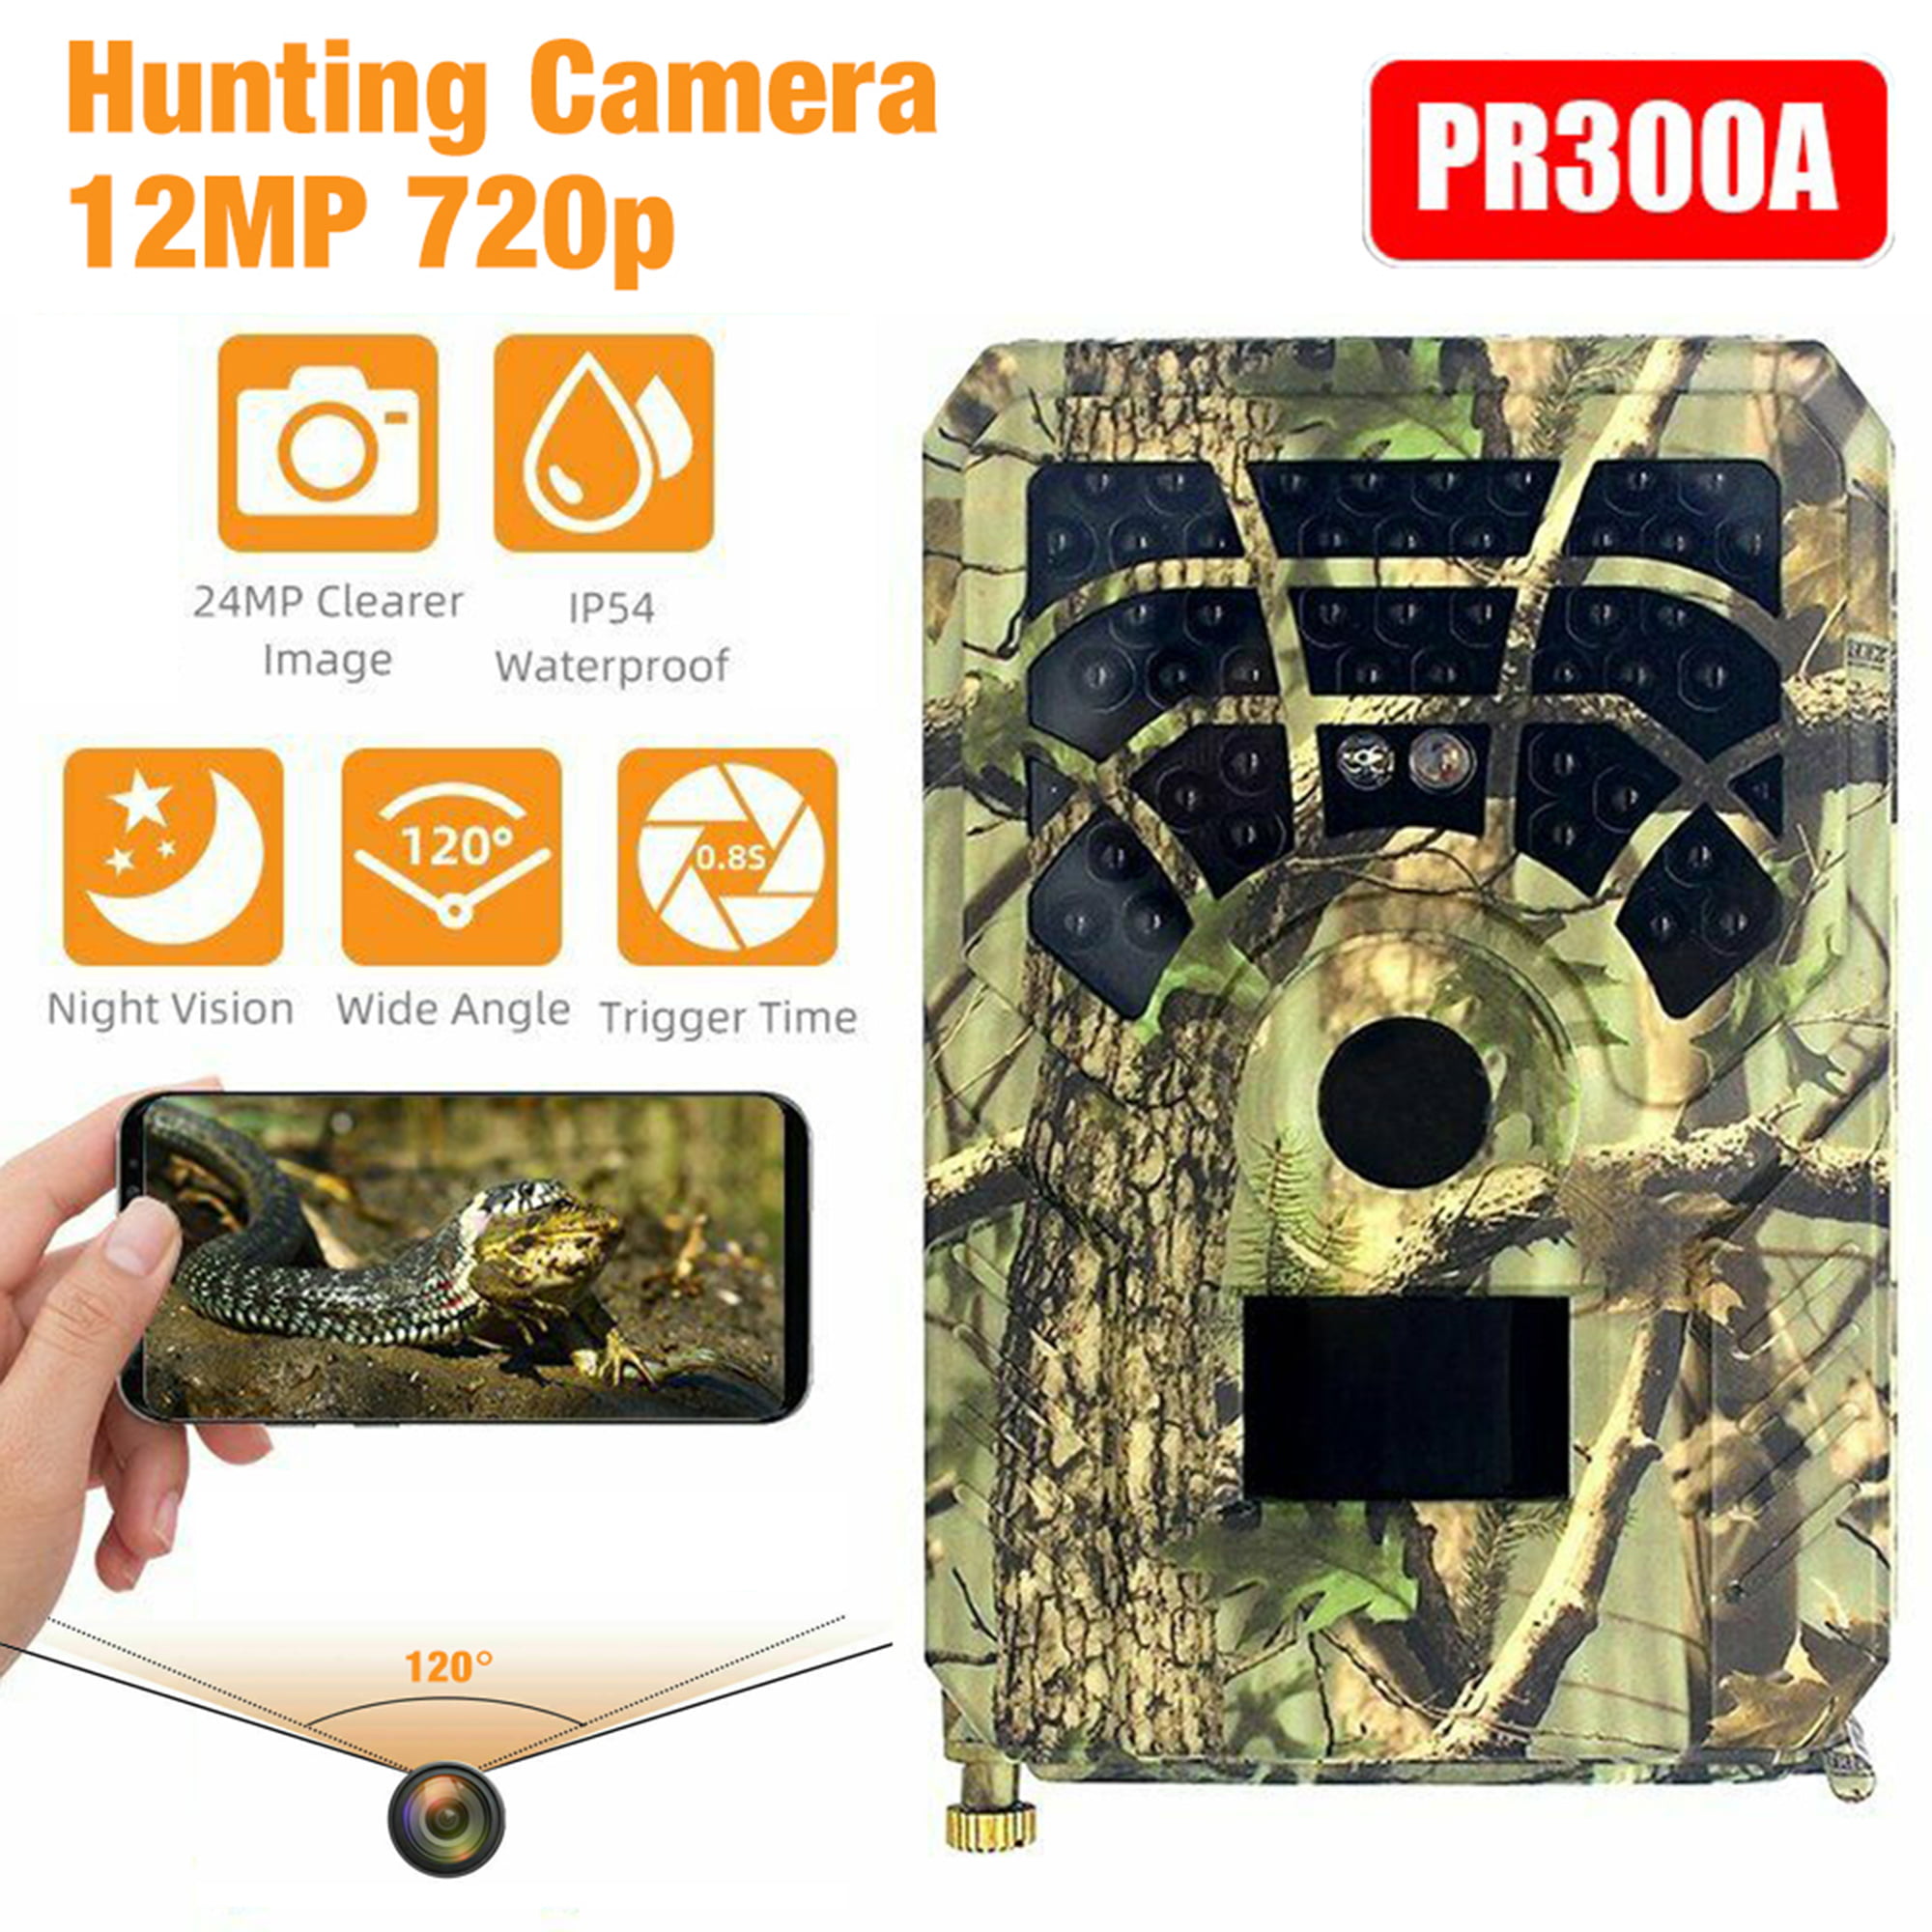 Hunting Camera 12MP 480P PR300A Wild Animals Trail Camcorder for Farm Security 